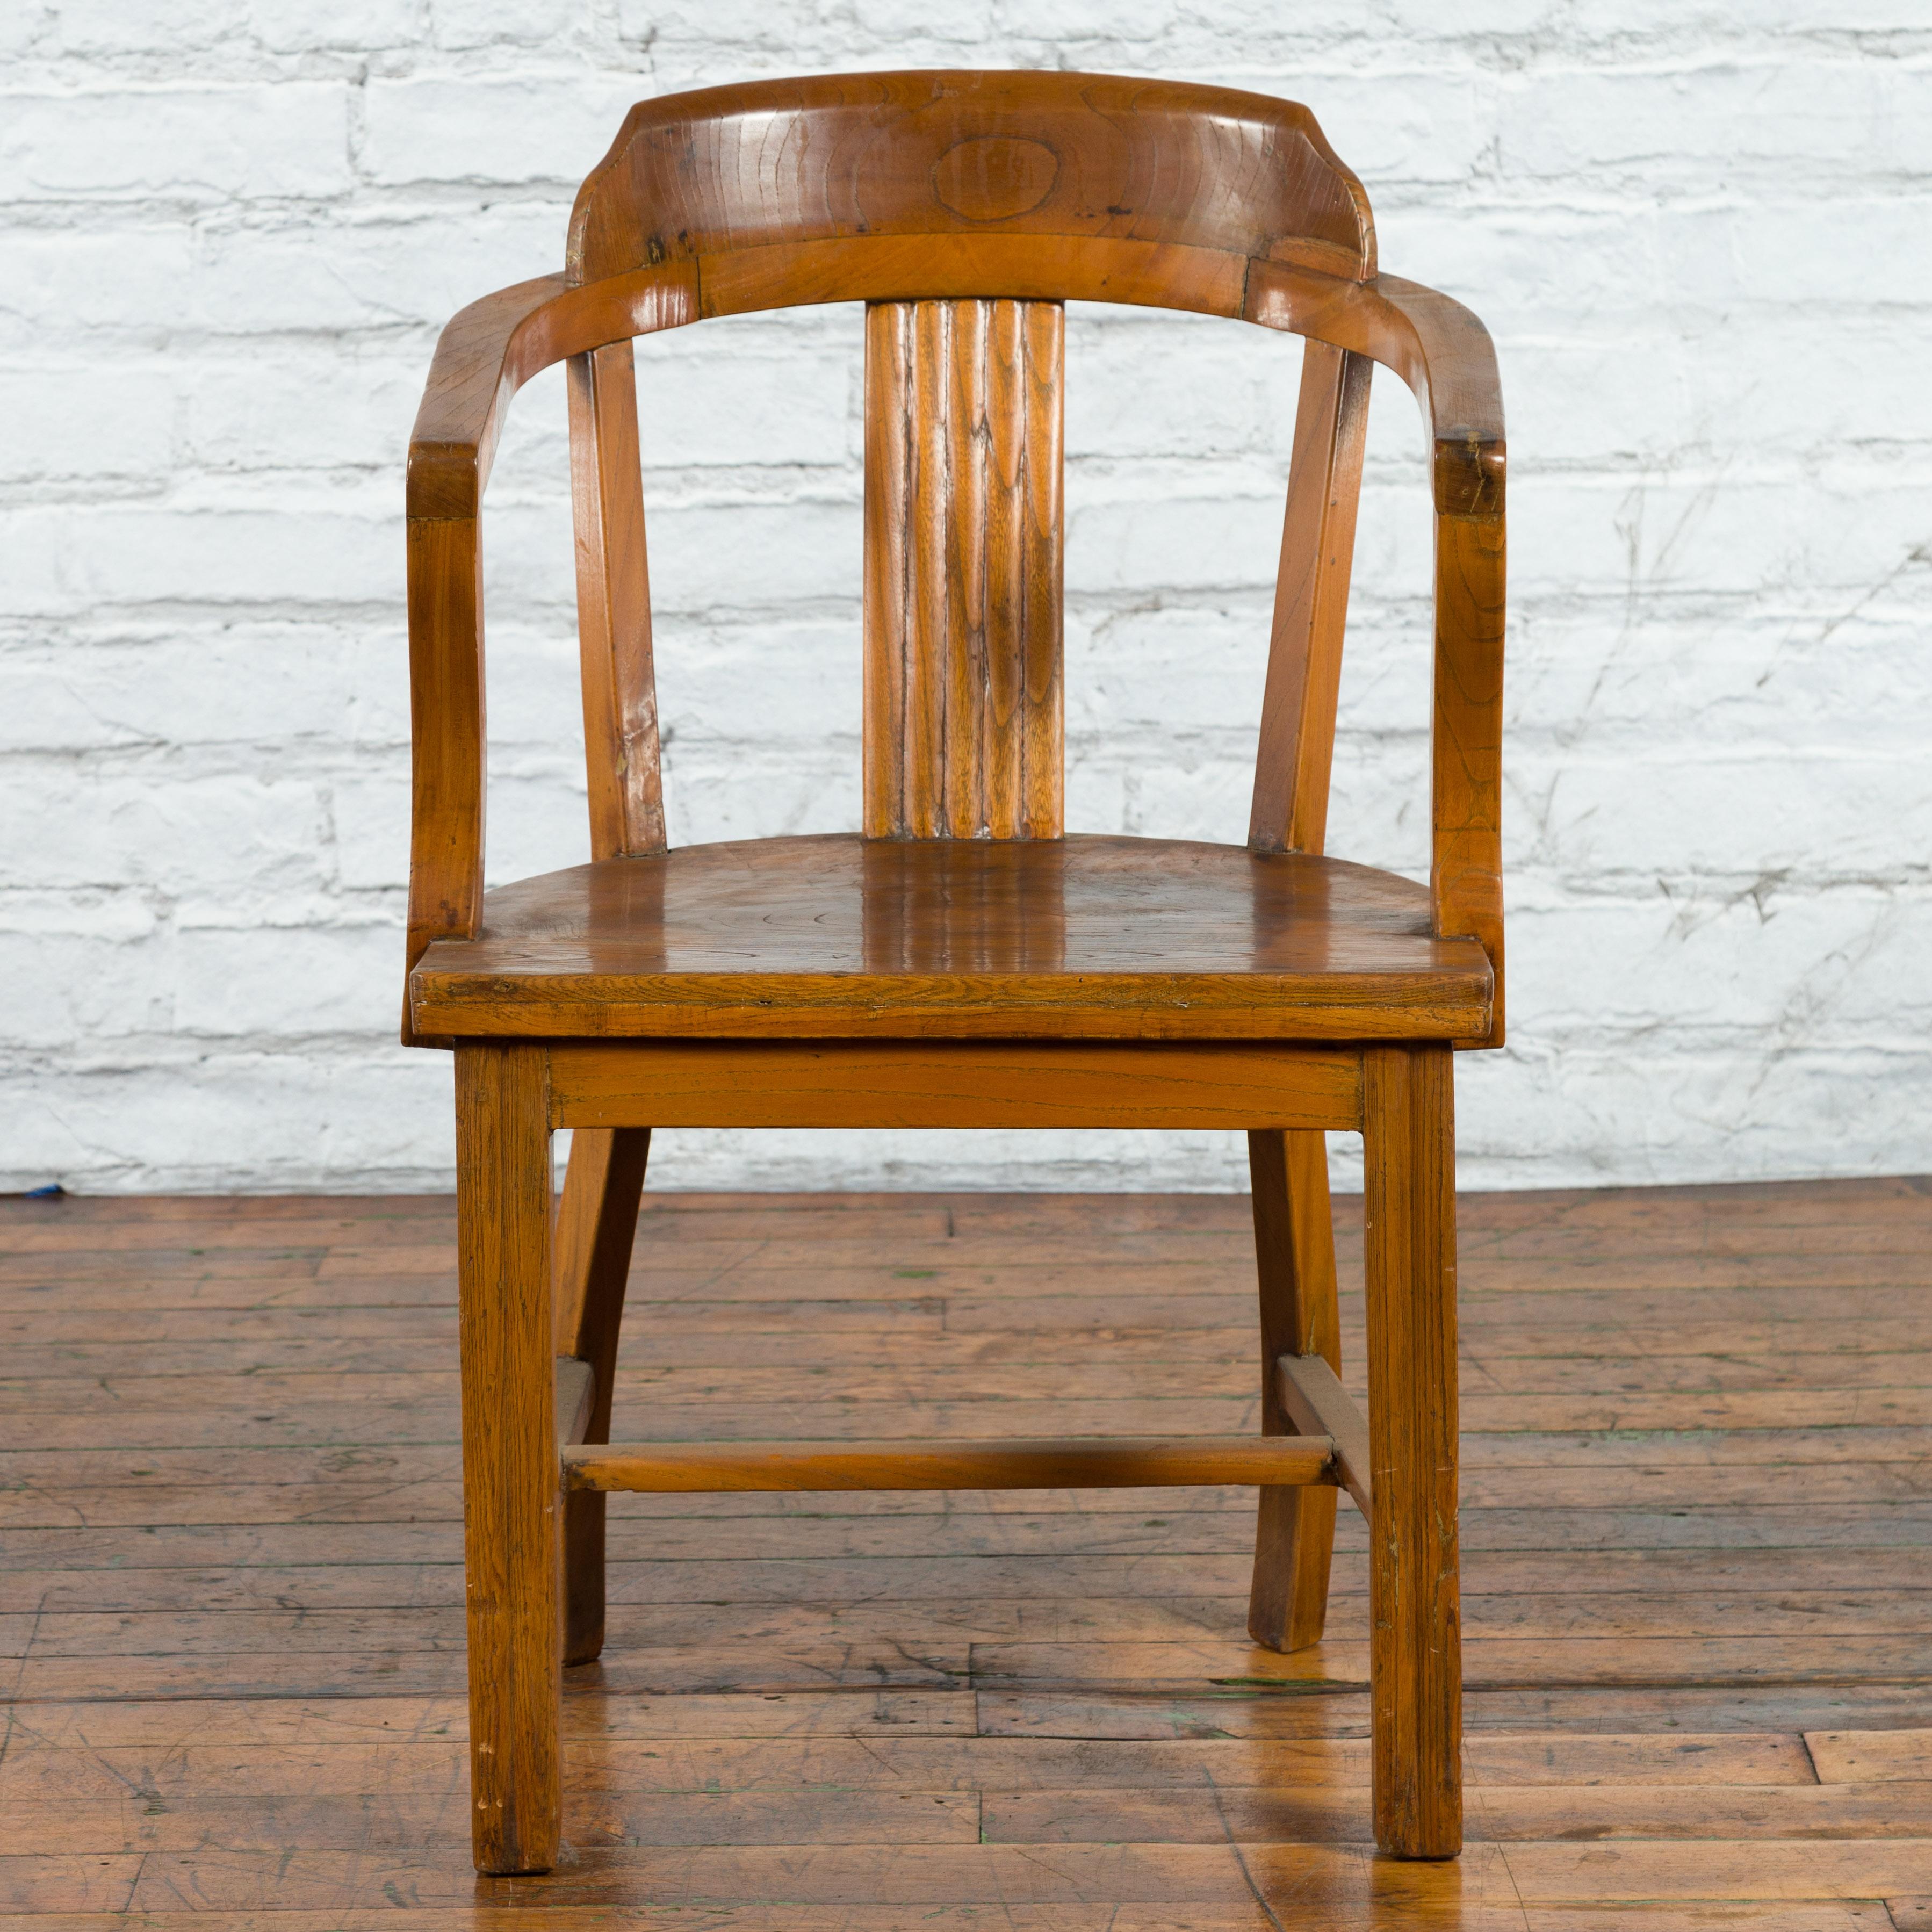 A Chinese wooden horseshoe armchair from the early 20th century with open back and arms, reeded splat and H-Form cross stretcher. Created in China during the early years of the 20th century, this wooden armchair features an open horseshoe back